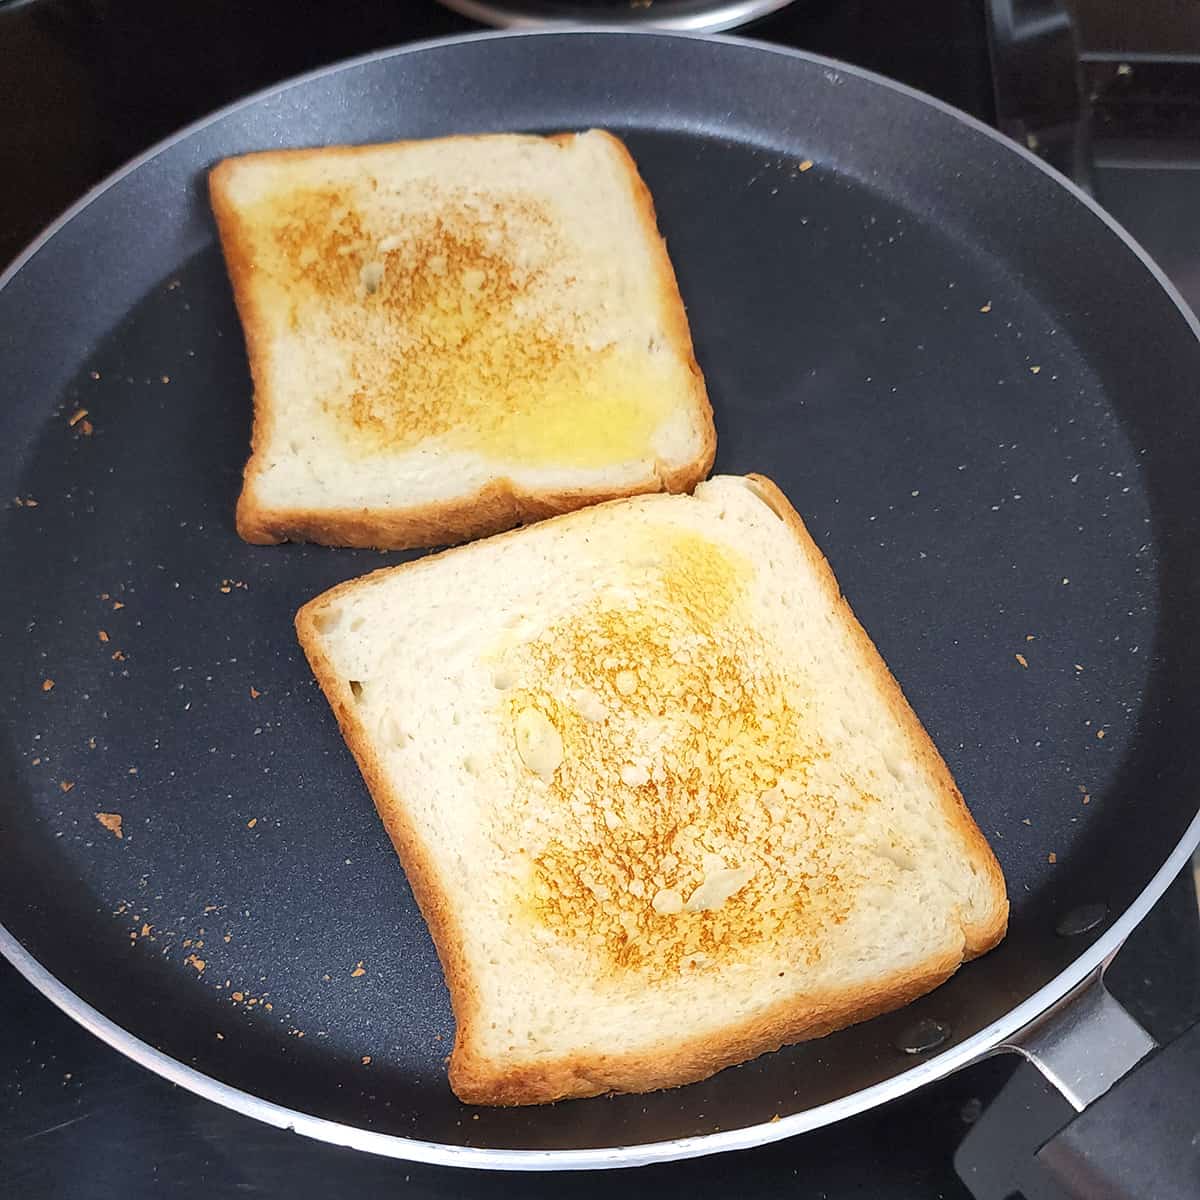 Toast the bread with butter in a black non stick skillet.